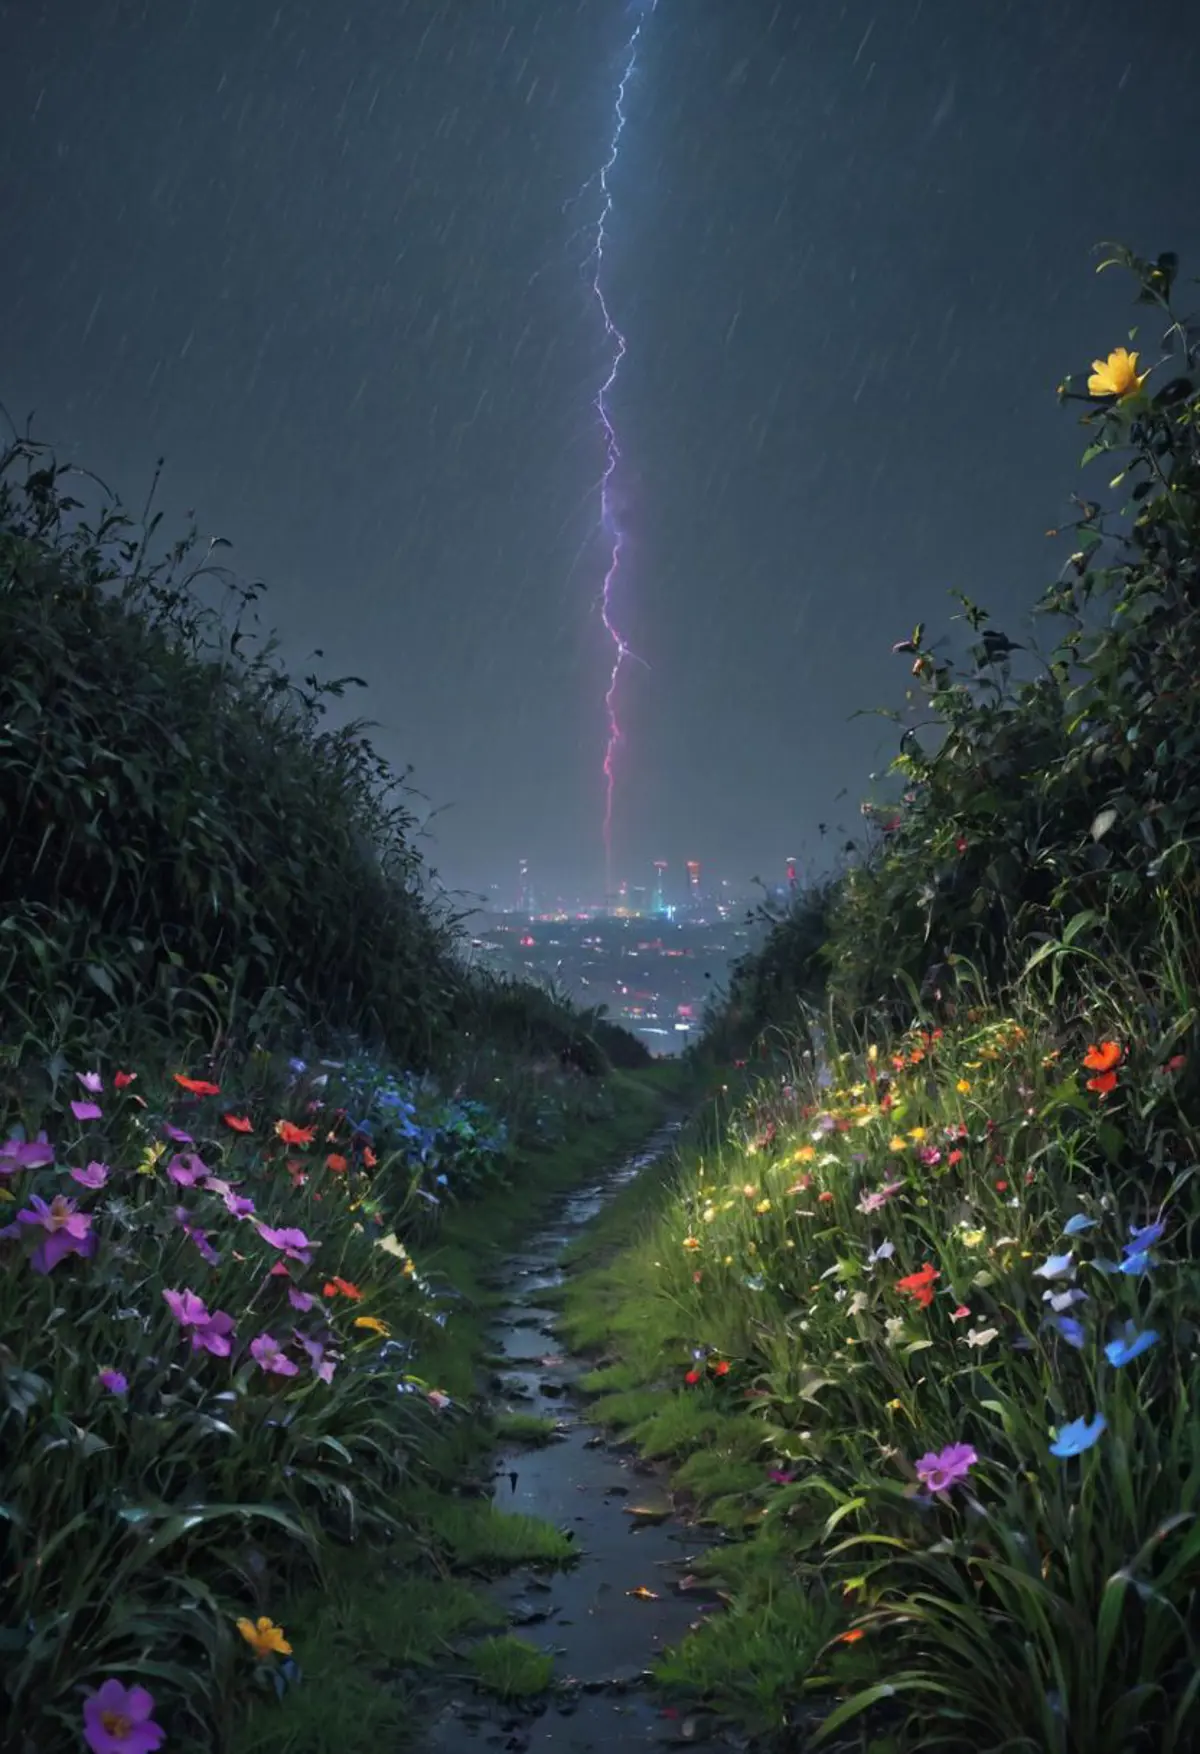 A narrow path lined with wildflowers leads towards a distant cityscape under a night sky. A single bolt of lightning strikes down, illuminating the darkened urban horizon and contrasting with the serene beauty of the natural foreground. 